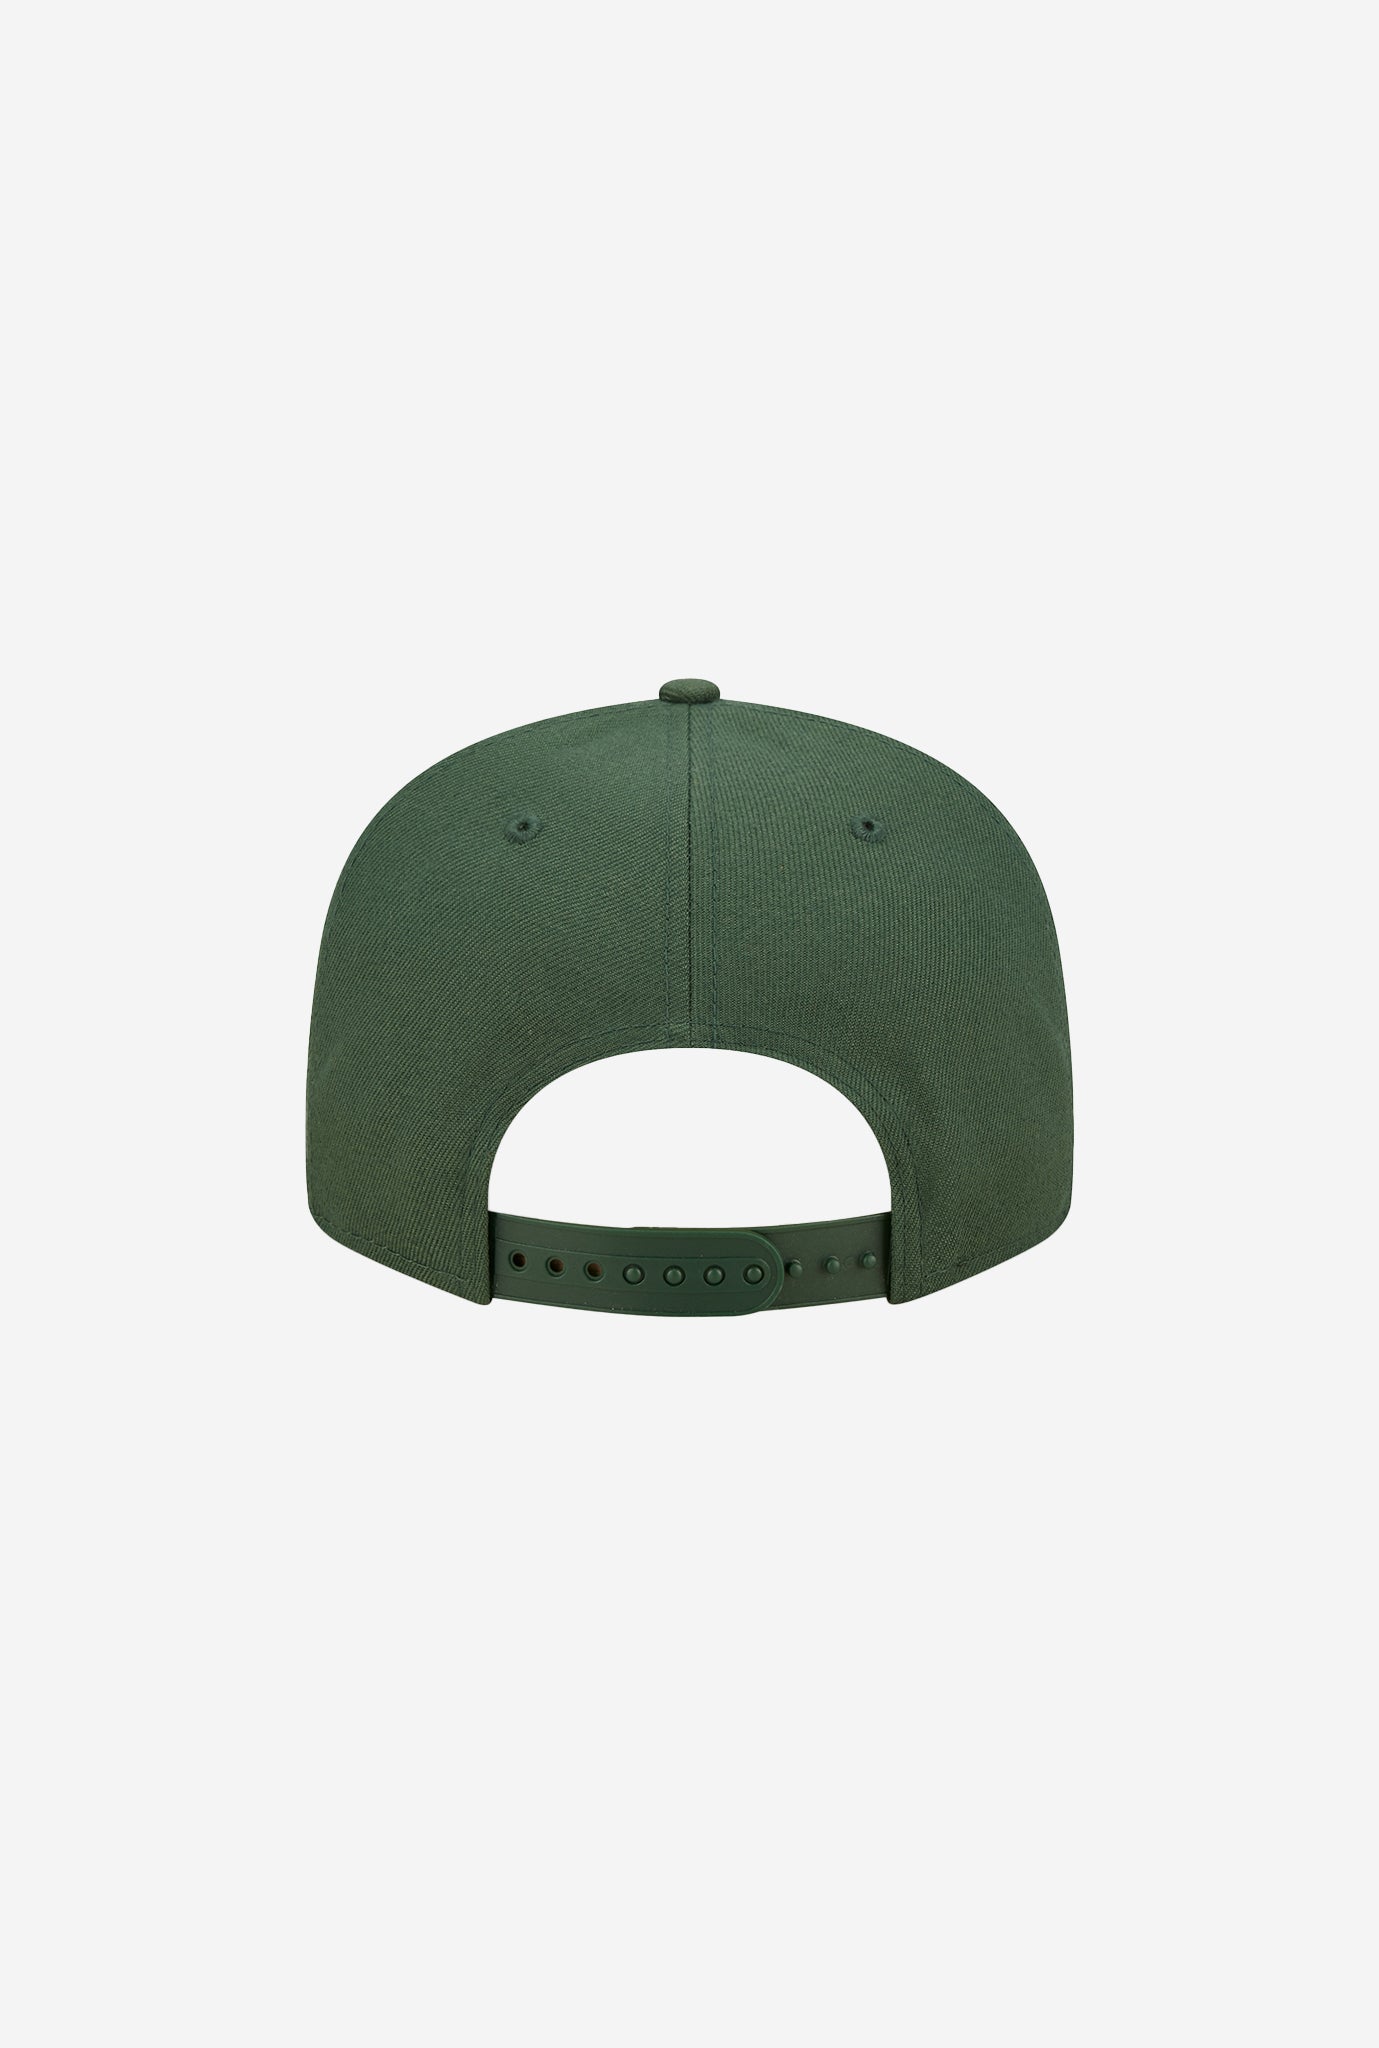 Green Bay Packers 9FIFTY Script